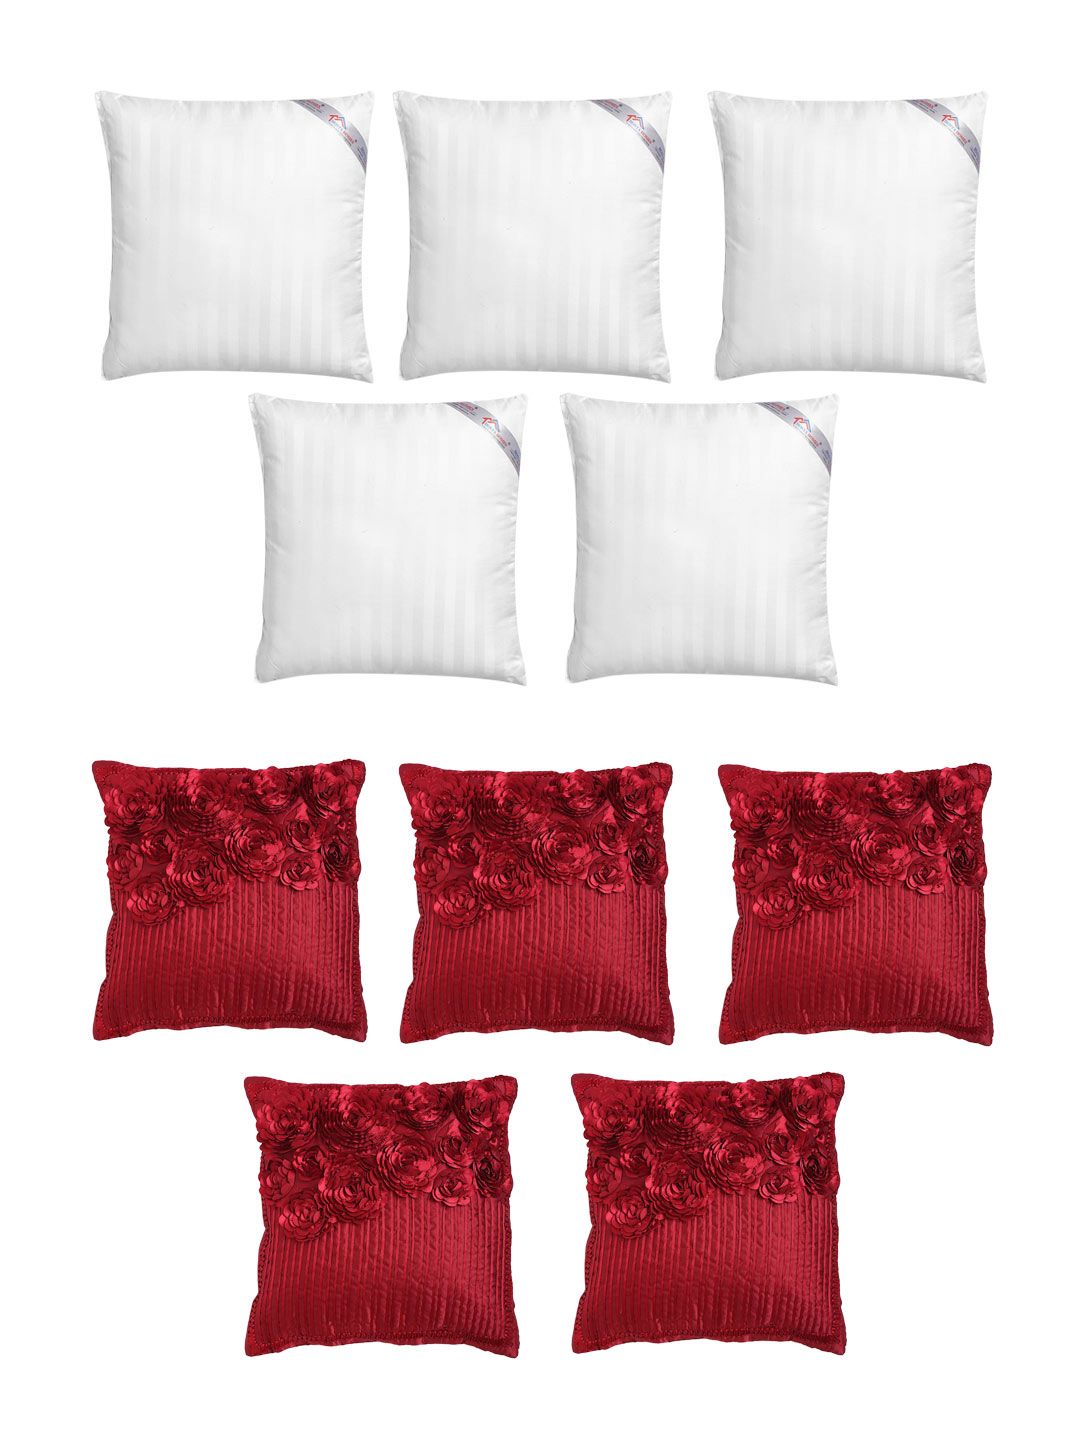 HOSTA HOMES Set of 5 Striped Cushions & 5 Embellished Square Cushion Covers Price in India